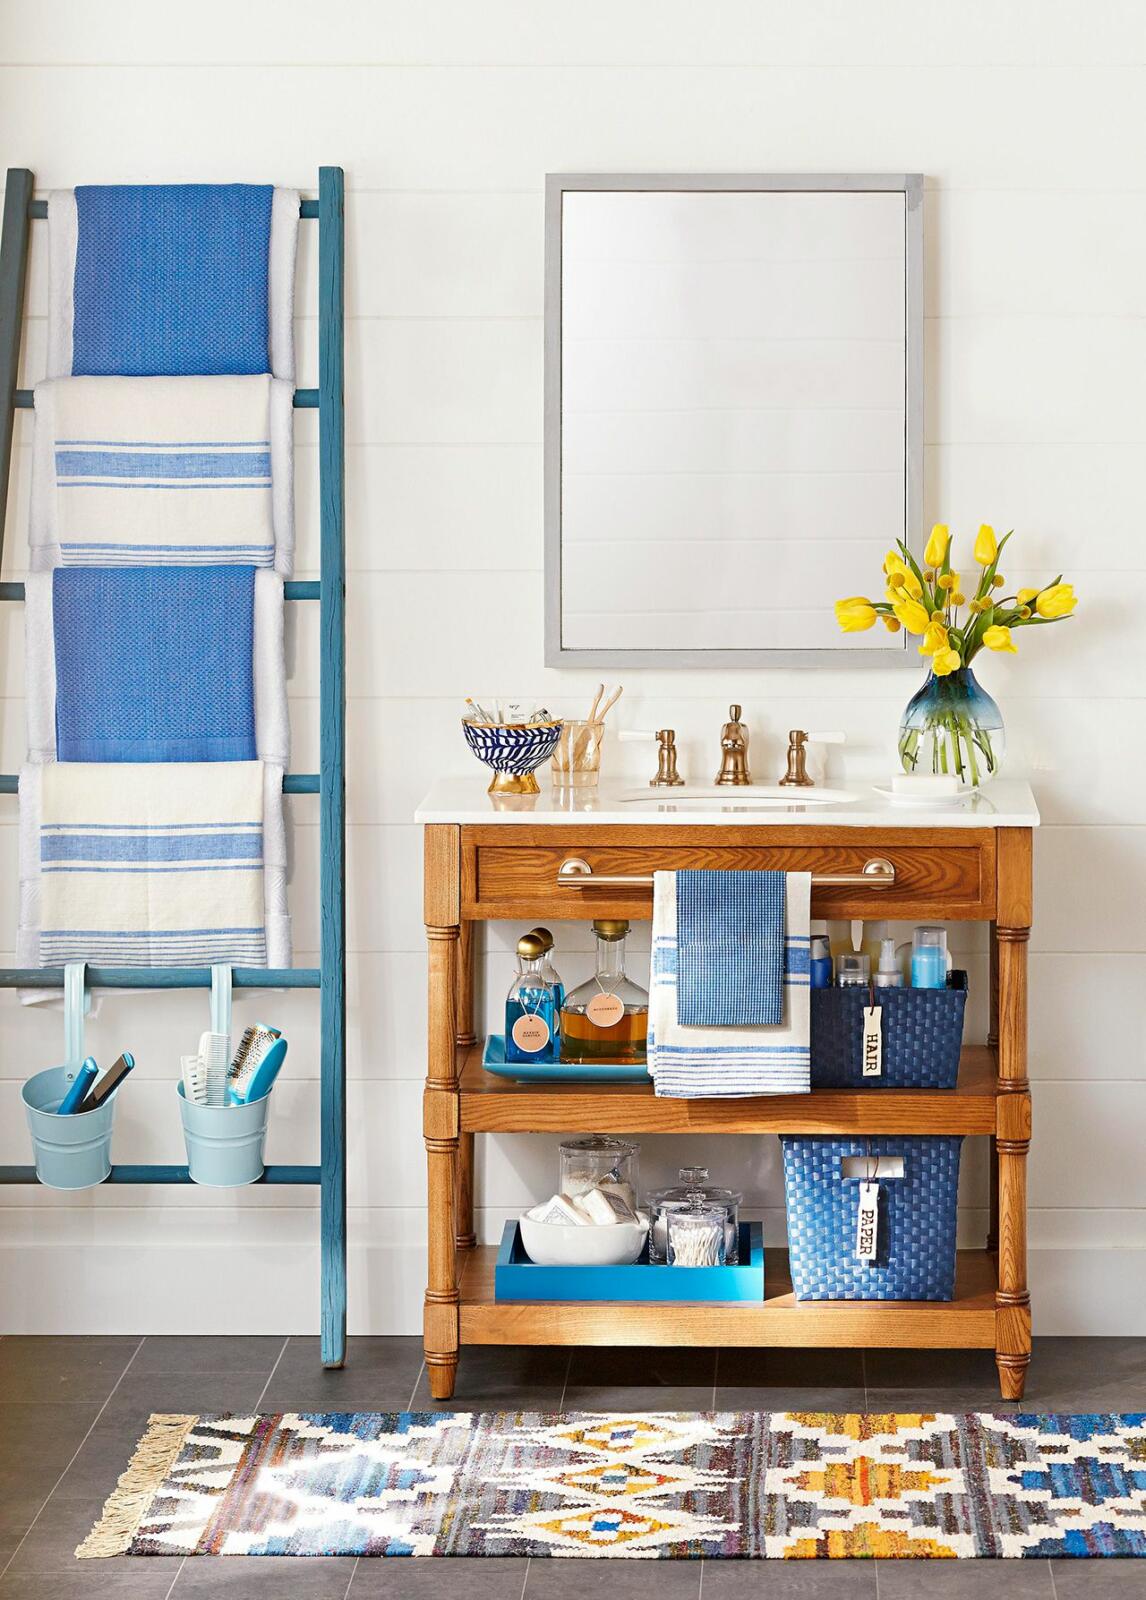 A bathroom with storage options: ladder, towels, and a rug.